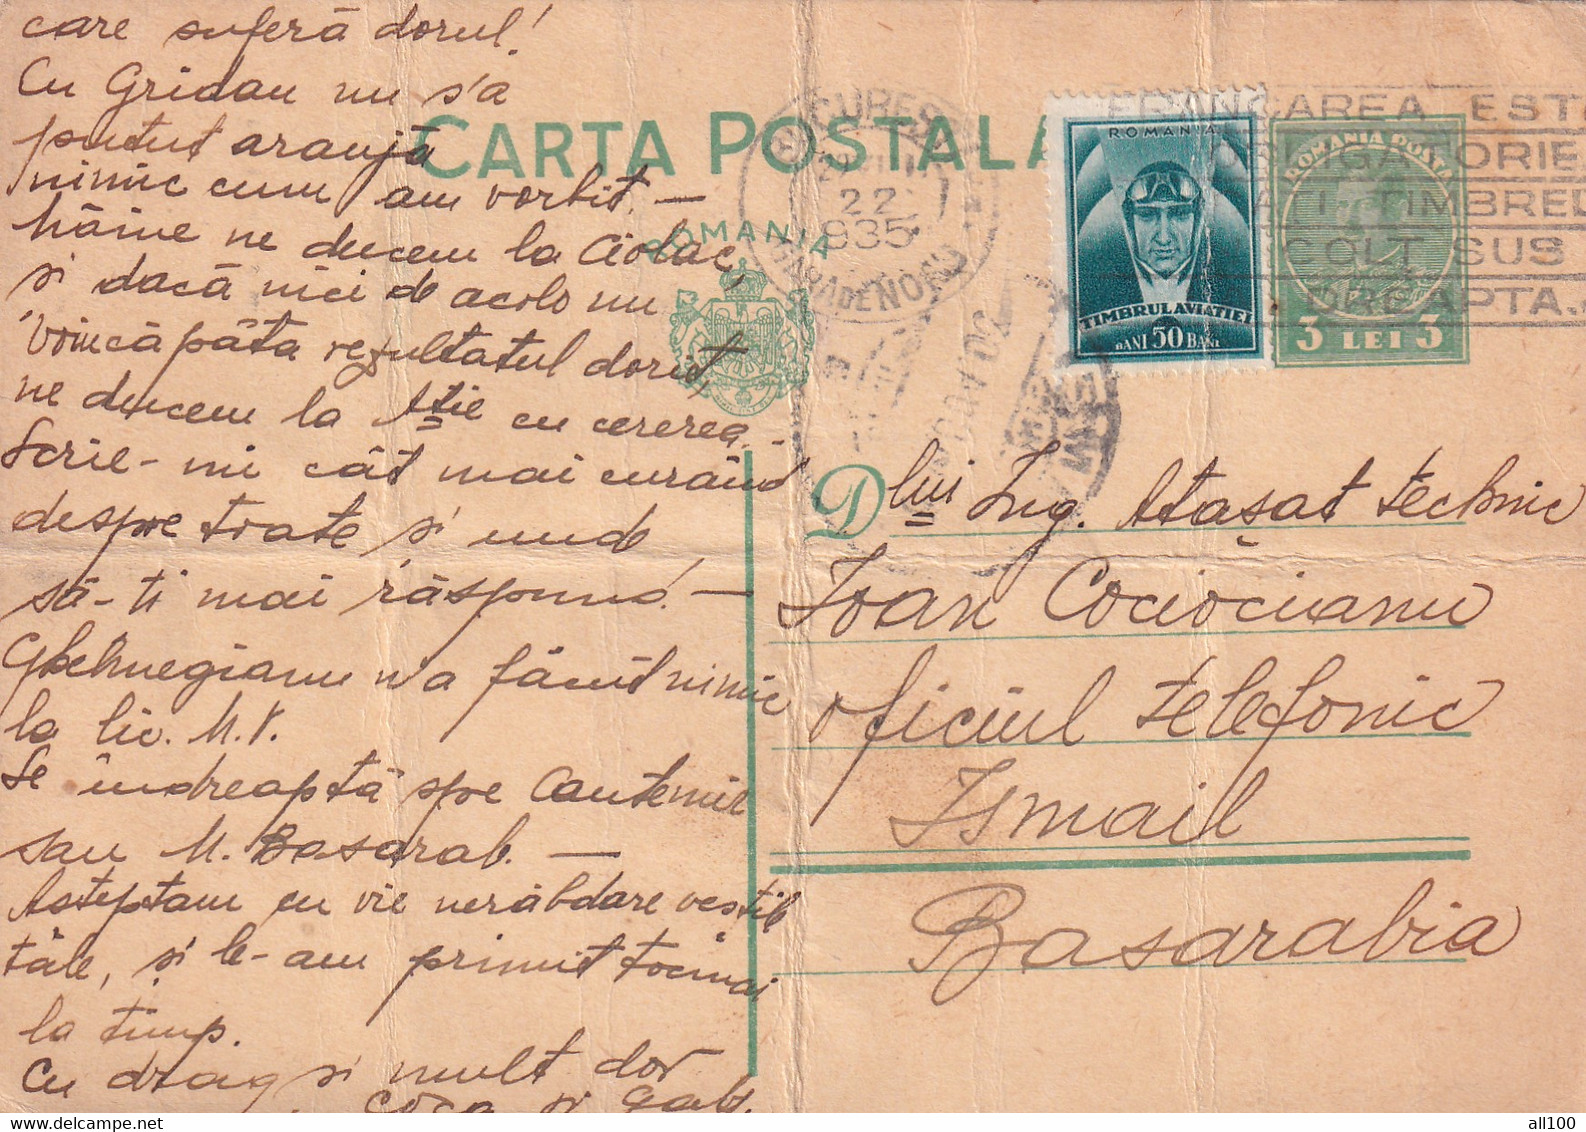 A16541 - POSTAL STATIONERY 1935 STAMP KING MICHAEL SEND TO ISMAIL BASARABIA - Covers & Documents